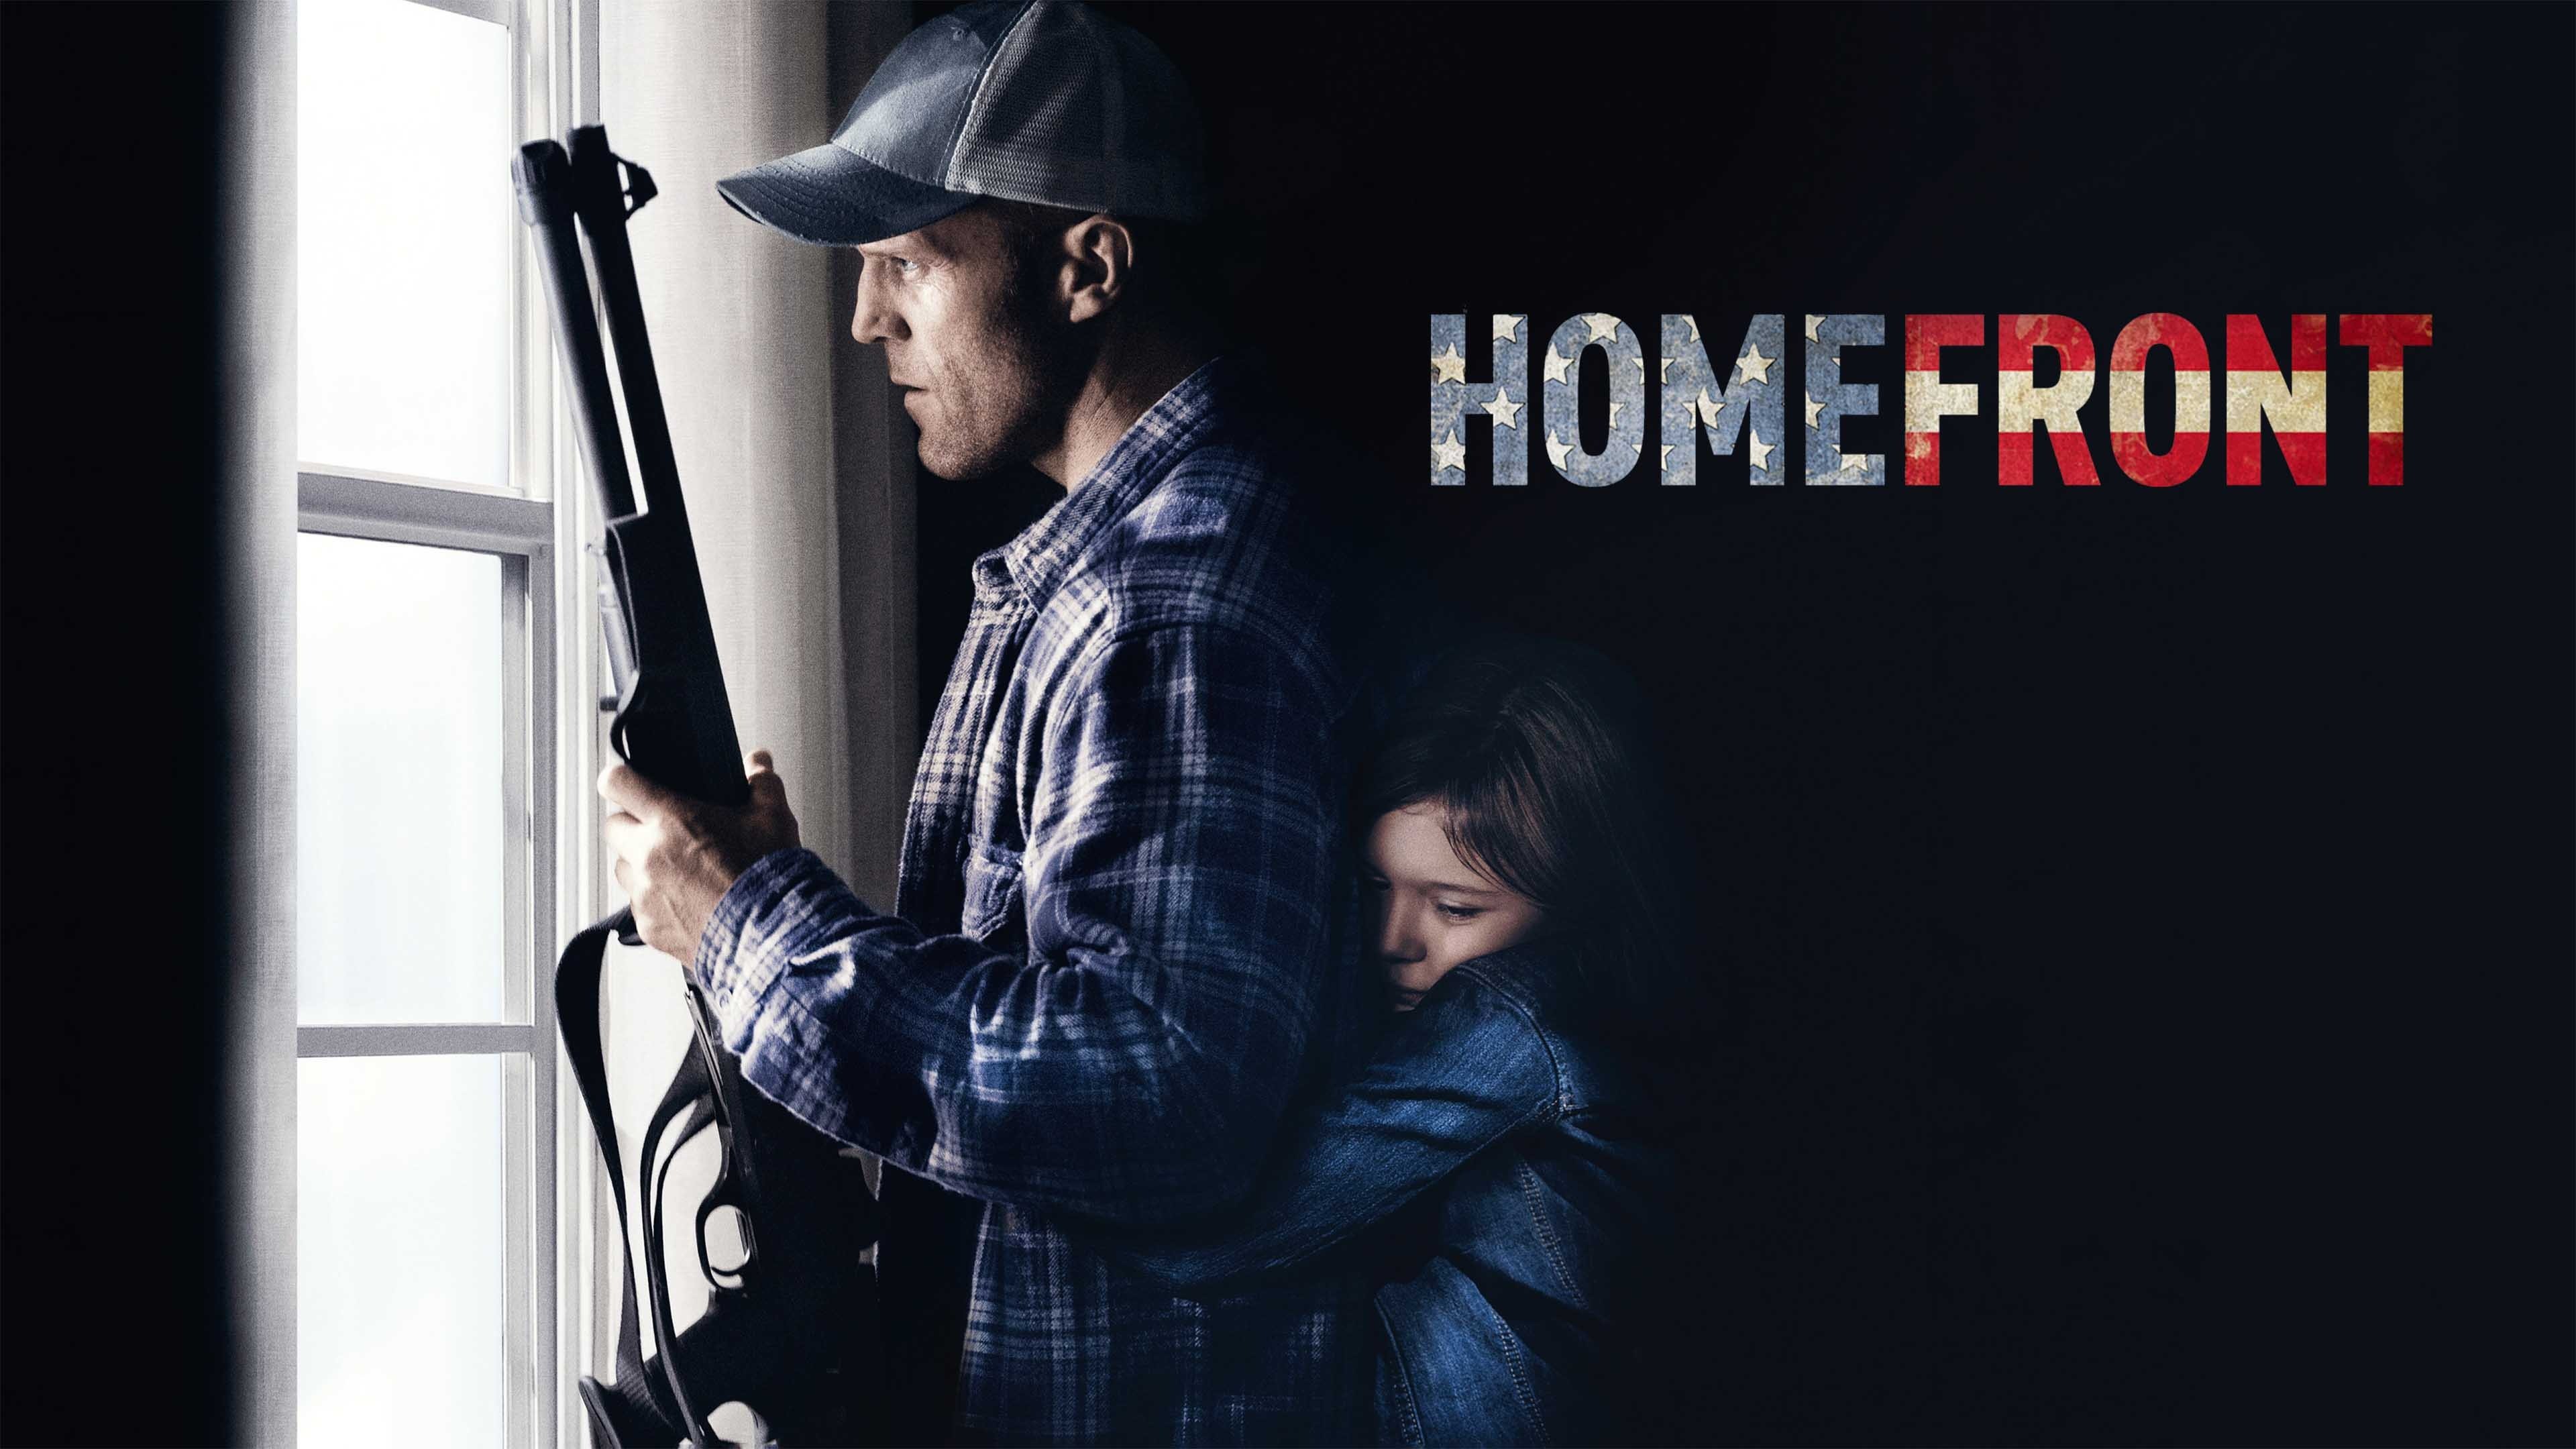 Amazon.com: Double Feature: Homefront / End of Watch : Movies & TV